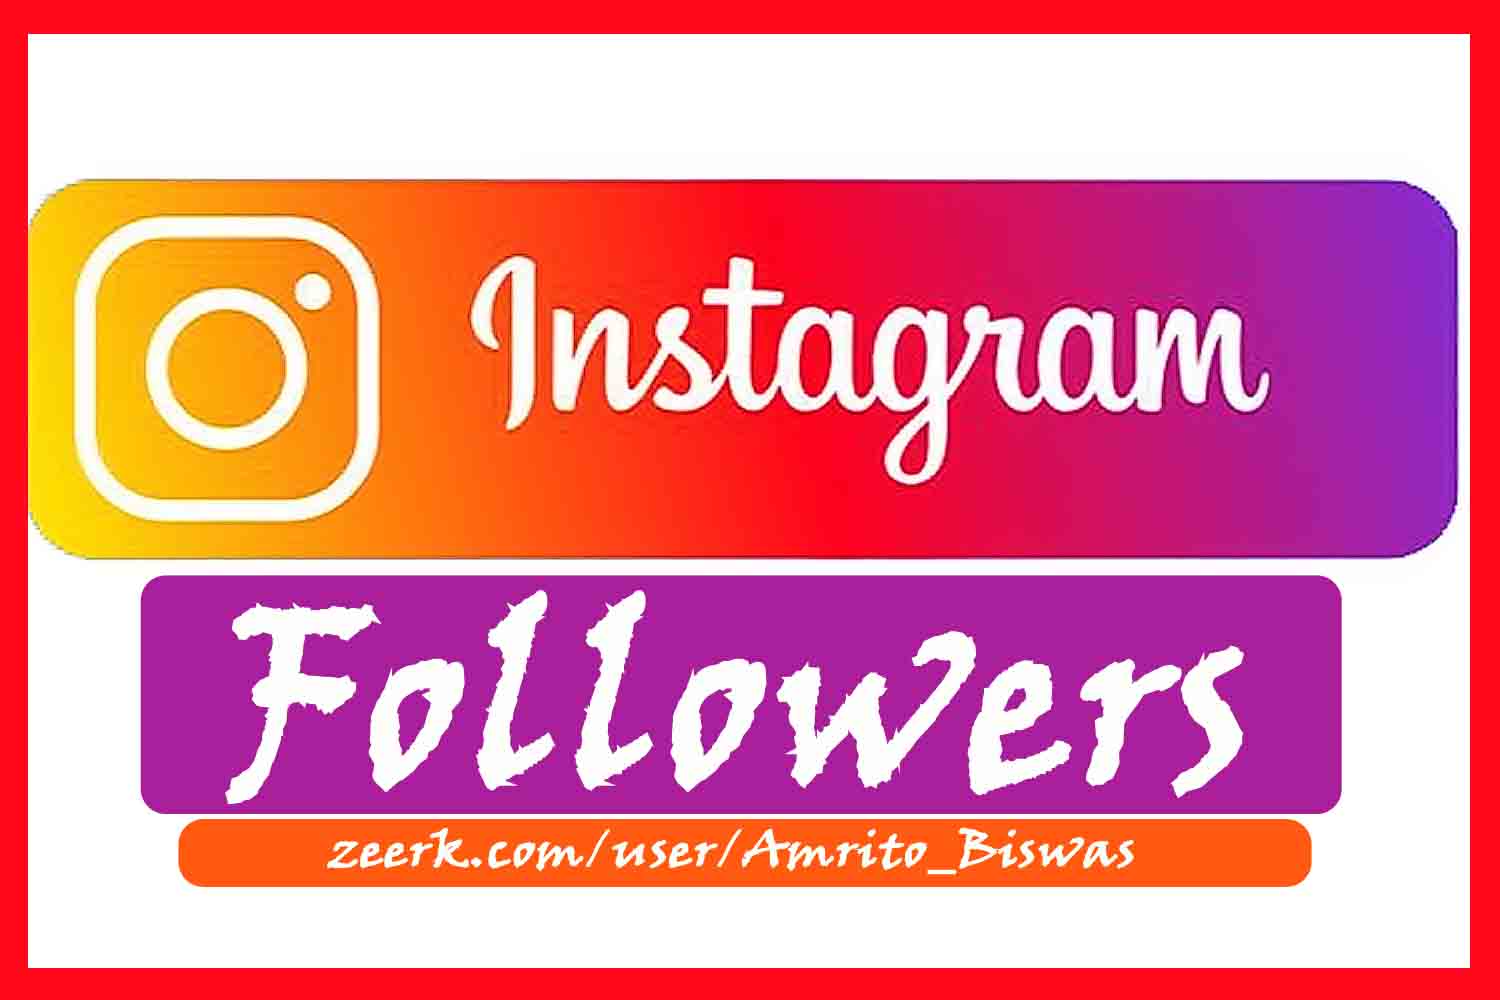 You Will get 1,500+ Instagram Real Followers, All Active User, None Dropped,100% Guarantee.